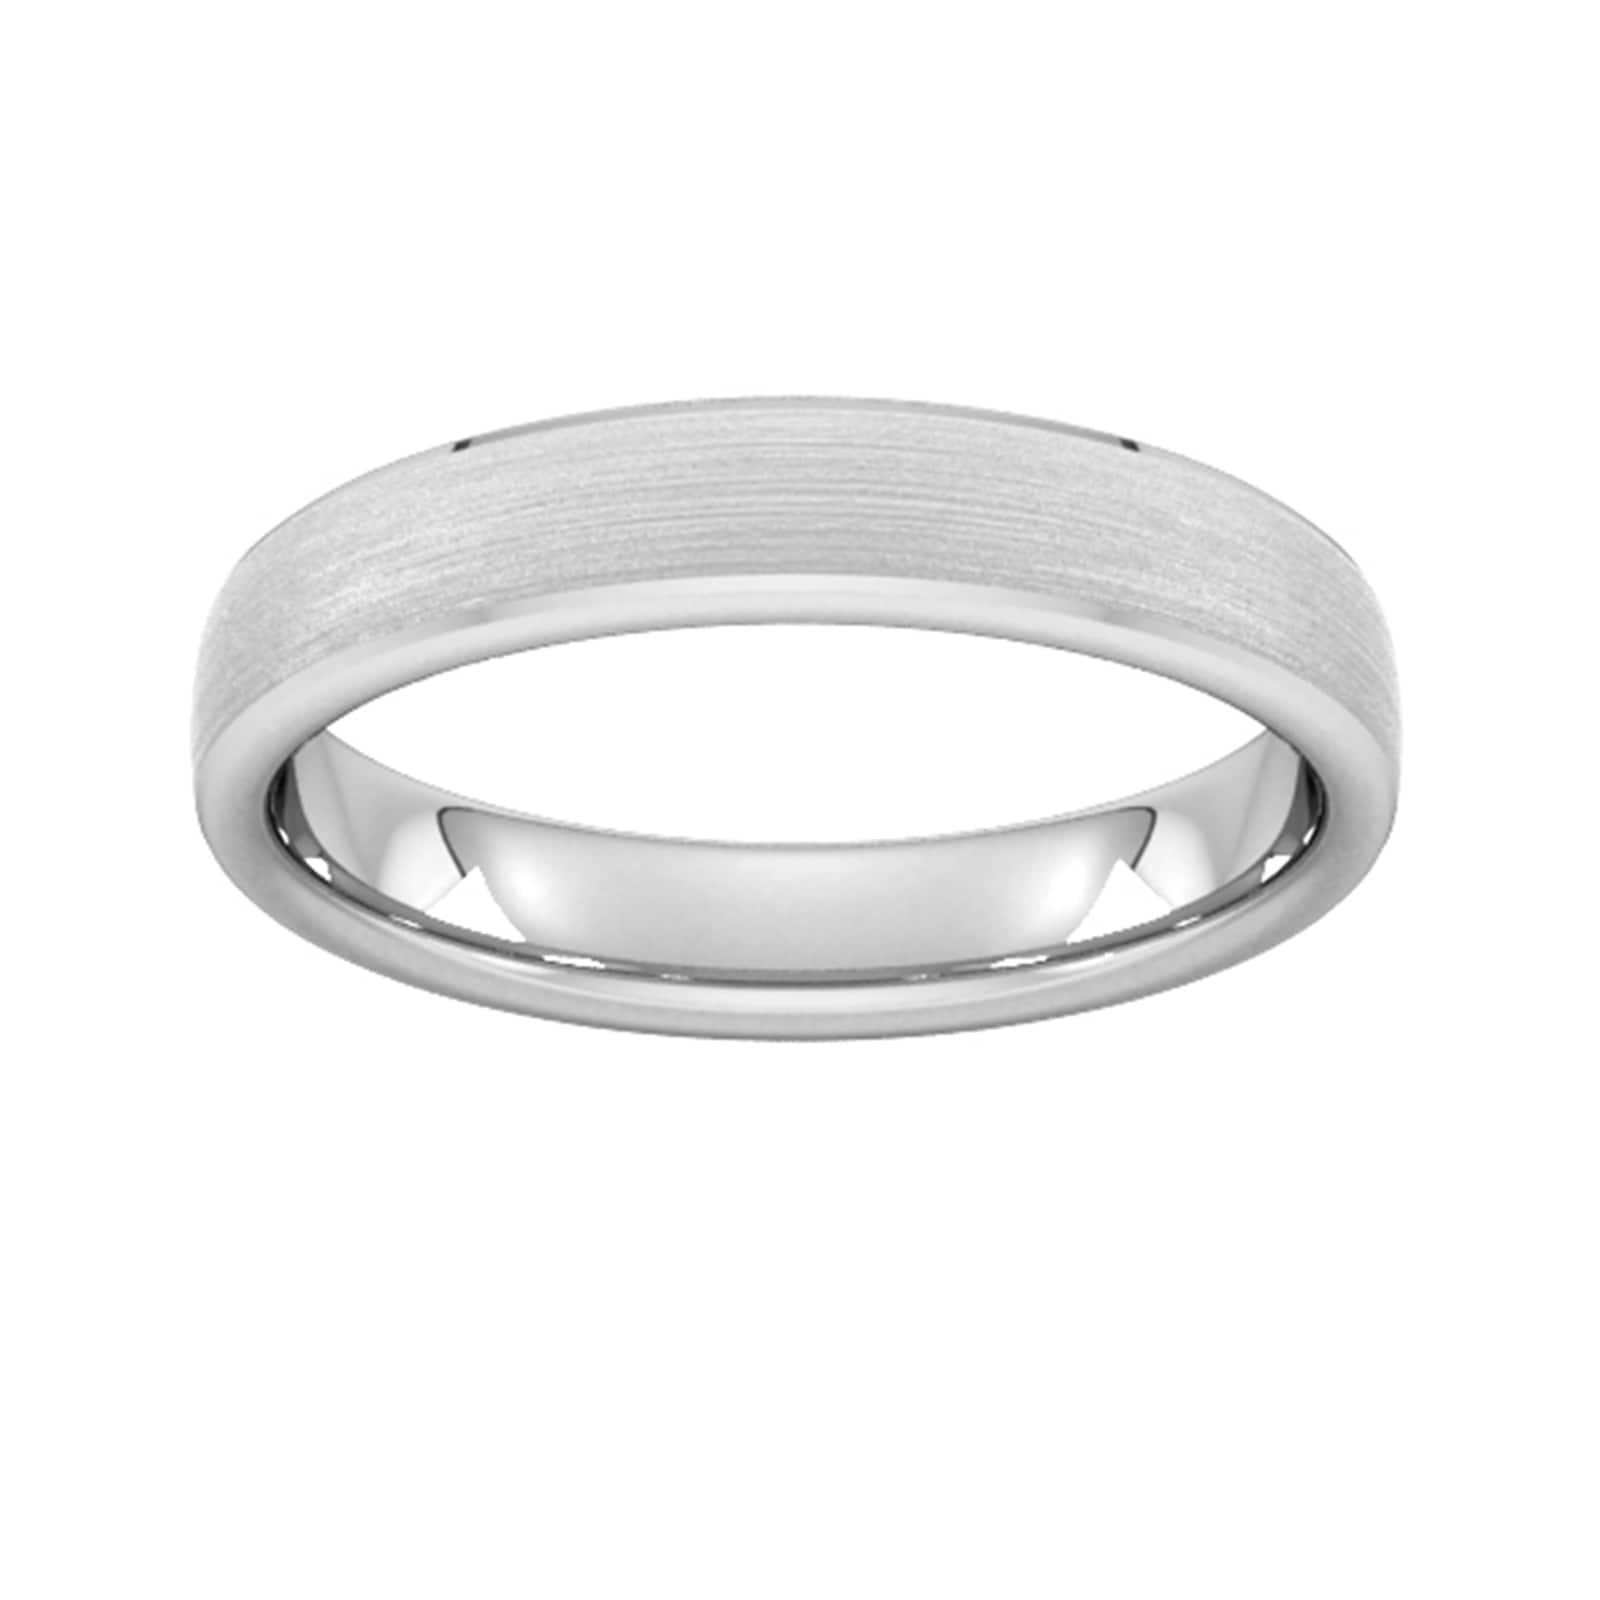 4mm Traditional Court Heavy Polished Chamfered Edges With Matt Centre Wedding Ring In 950 Palladium - Ring Size P